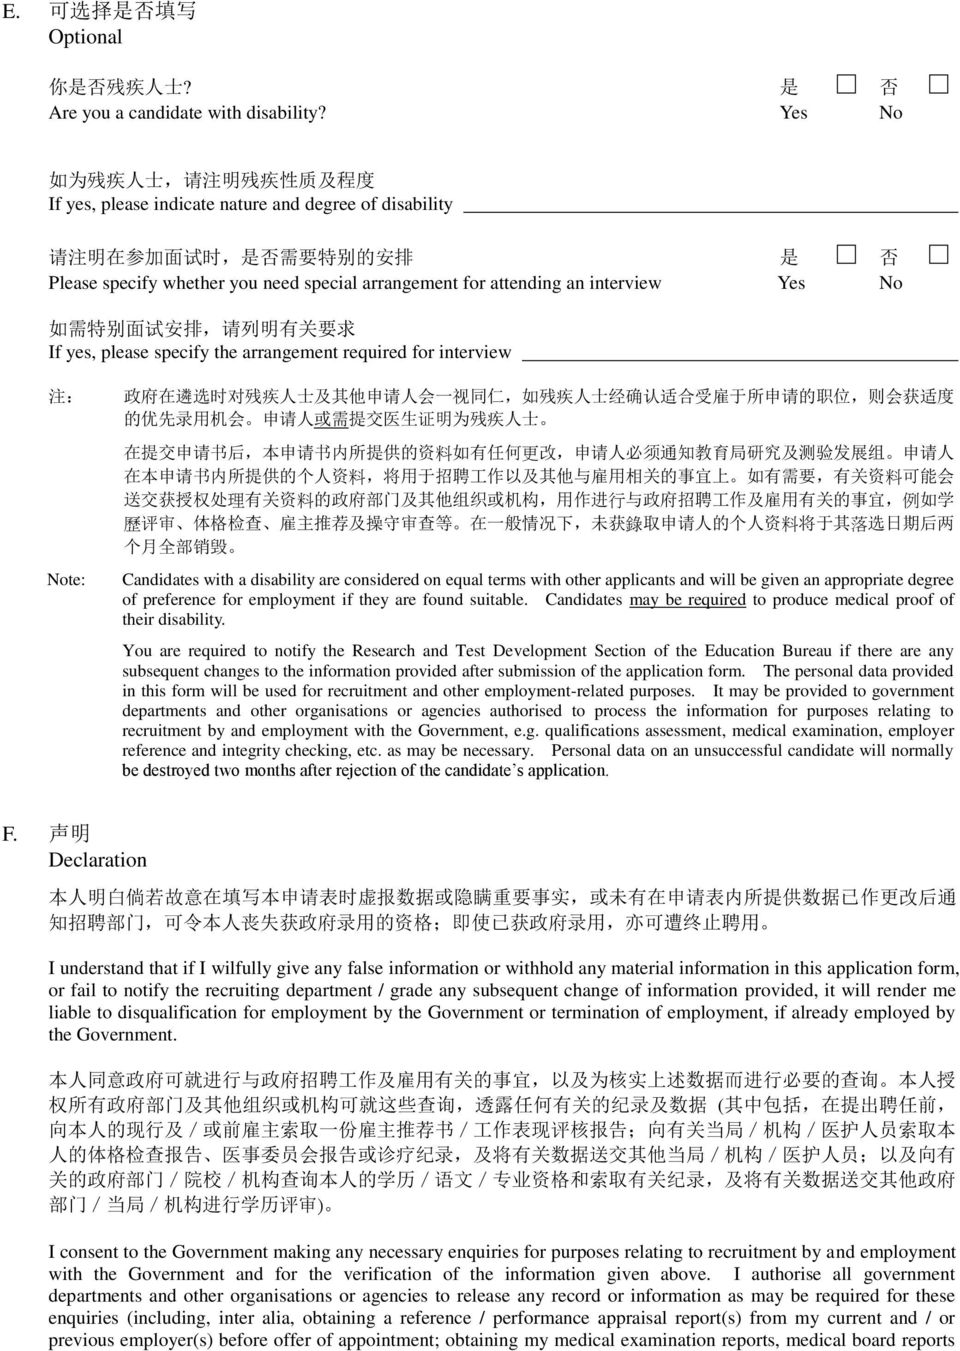 attending an interview Yes No 如 需 特 别 面 试 安 排, 请 列 明 有 关 要 求 If yes, please specify the arrangement required for interview 注 : 政 府 在 遴 选 时 对 残 疾 人 士 及 其 他 申 请 人 会 一 视 同 仁, 如 残 疾 人 士 经 确 认 适 合 受 雇 于 所